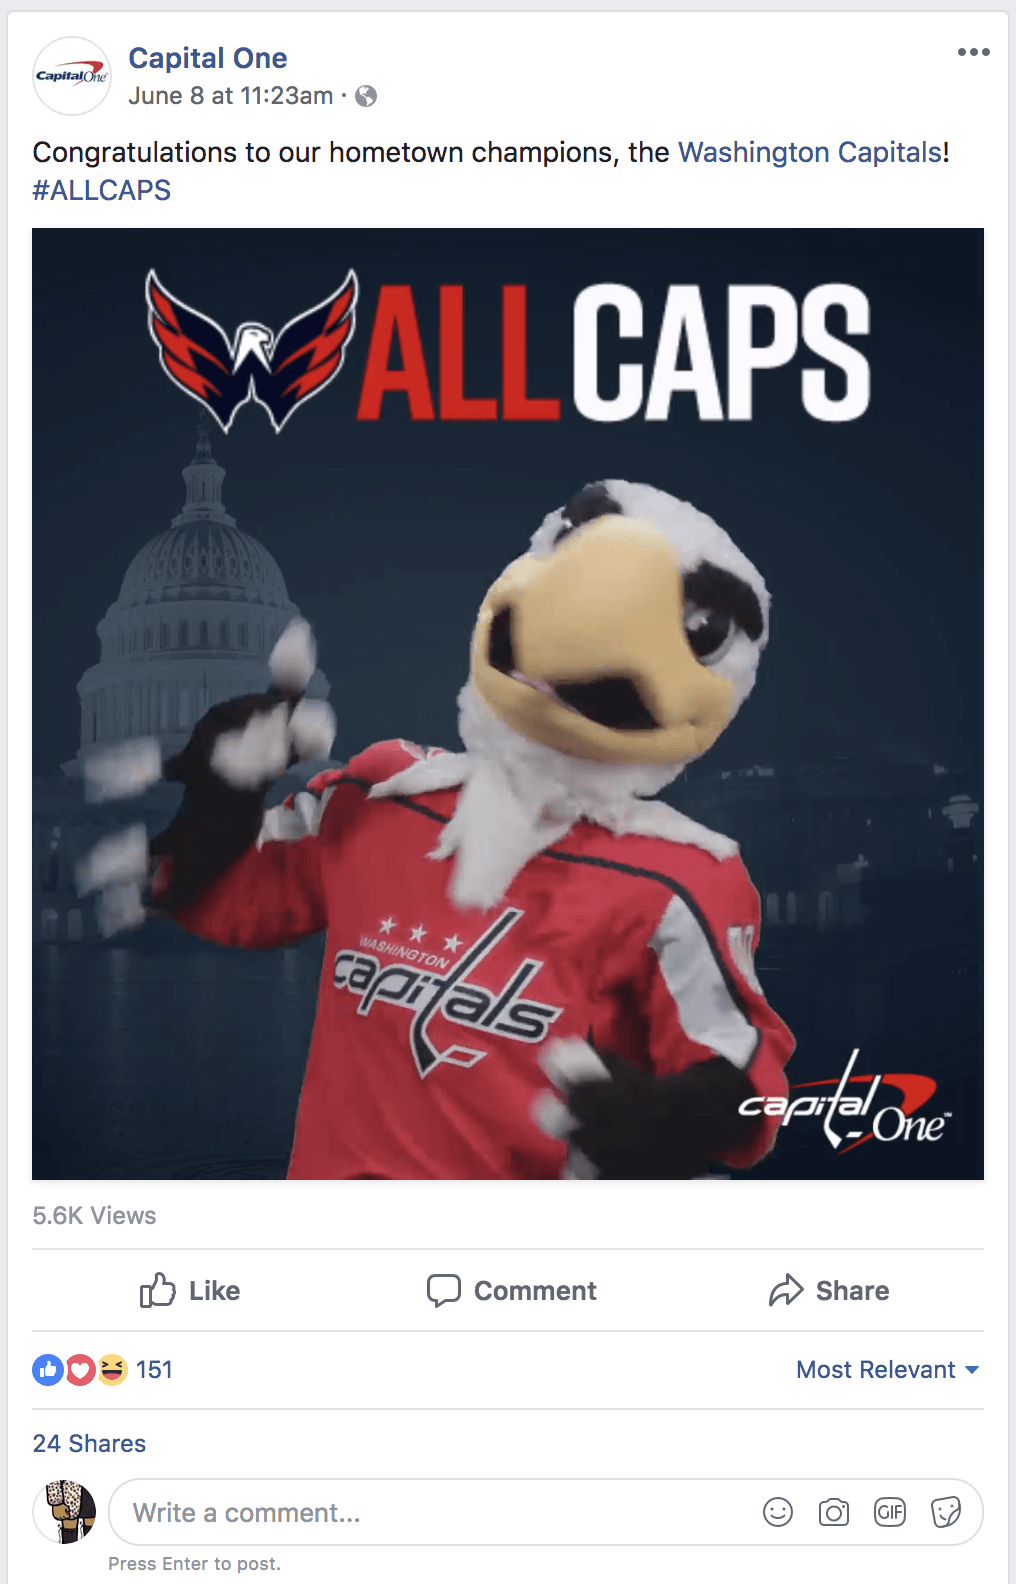 Art Direction, Video Editing & Animation for the Washington Capitals in the Playoffs